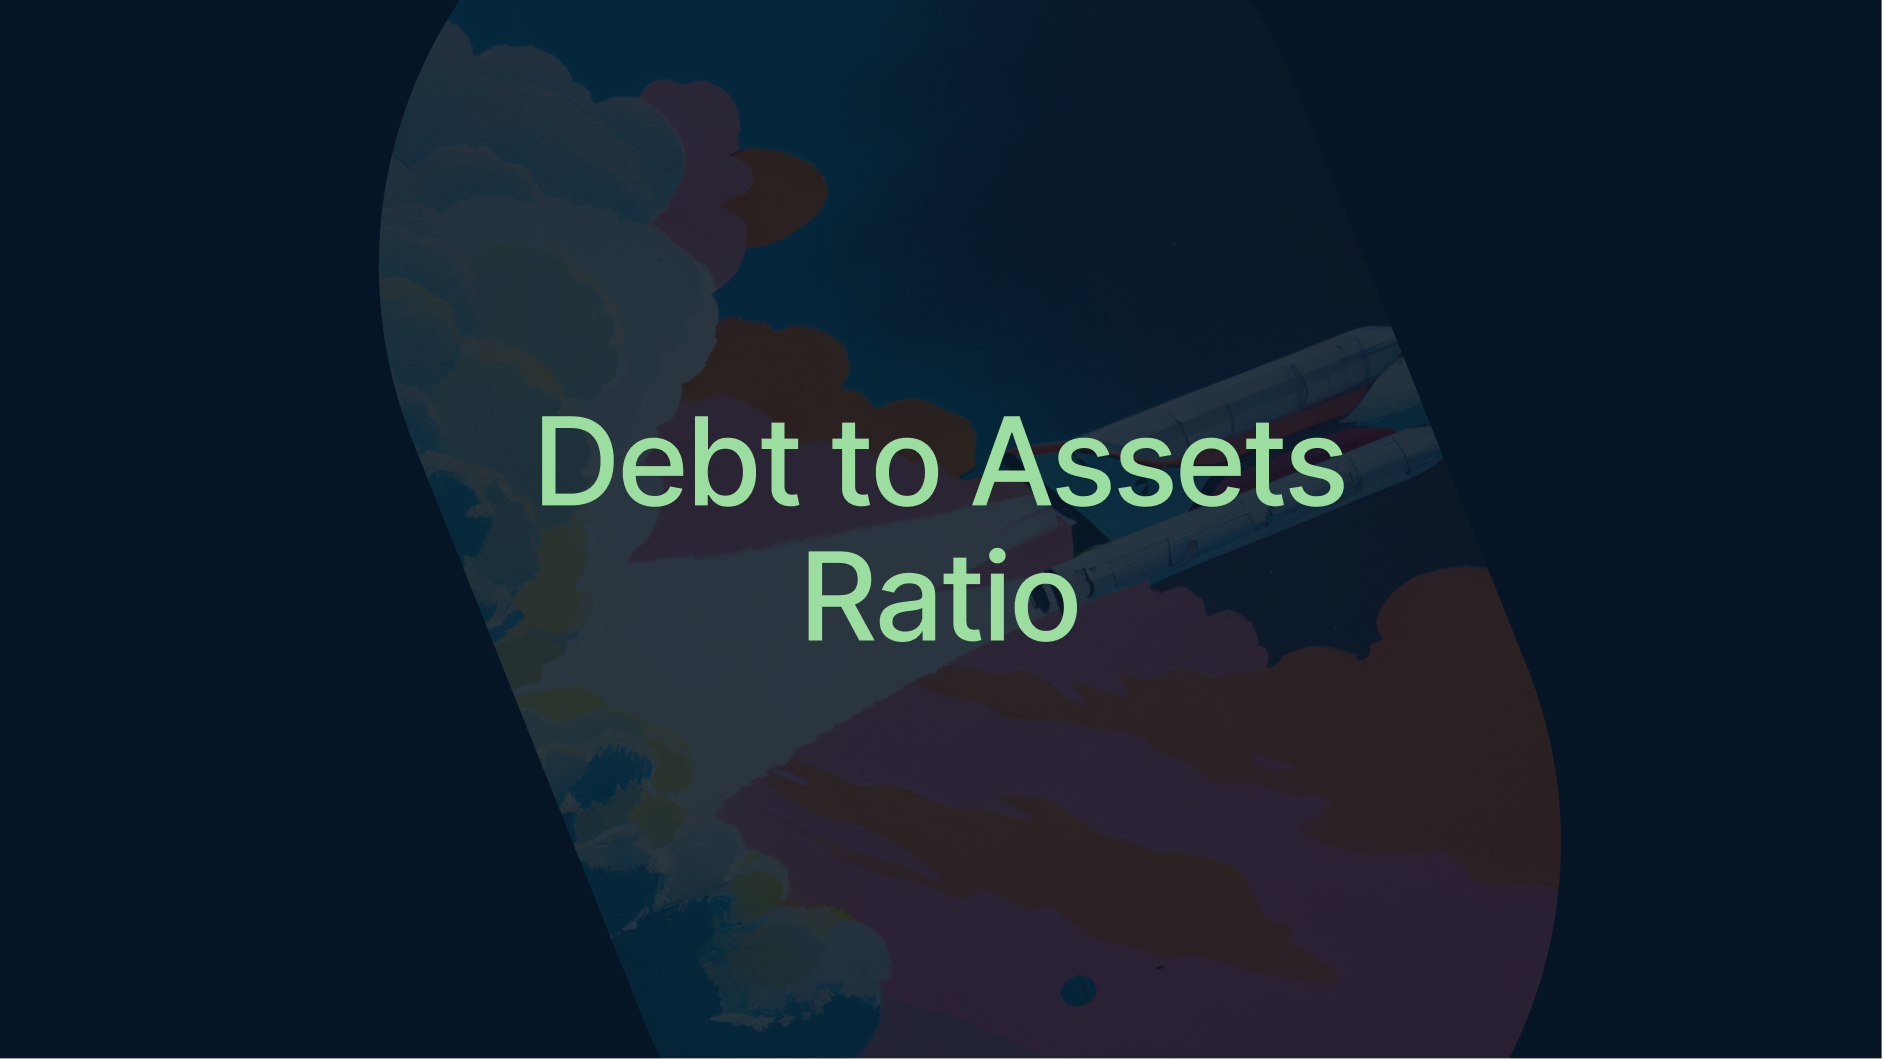 Debt to Assets